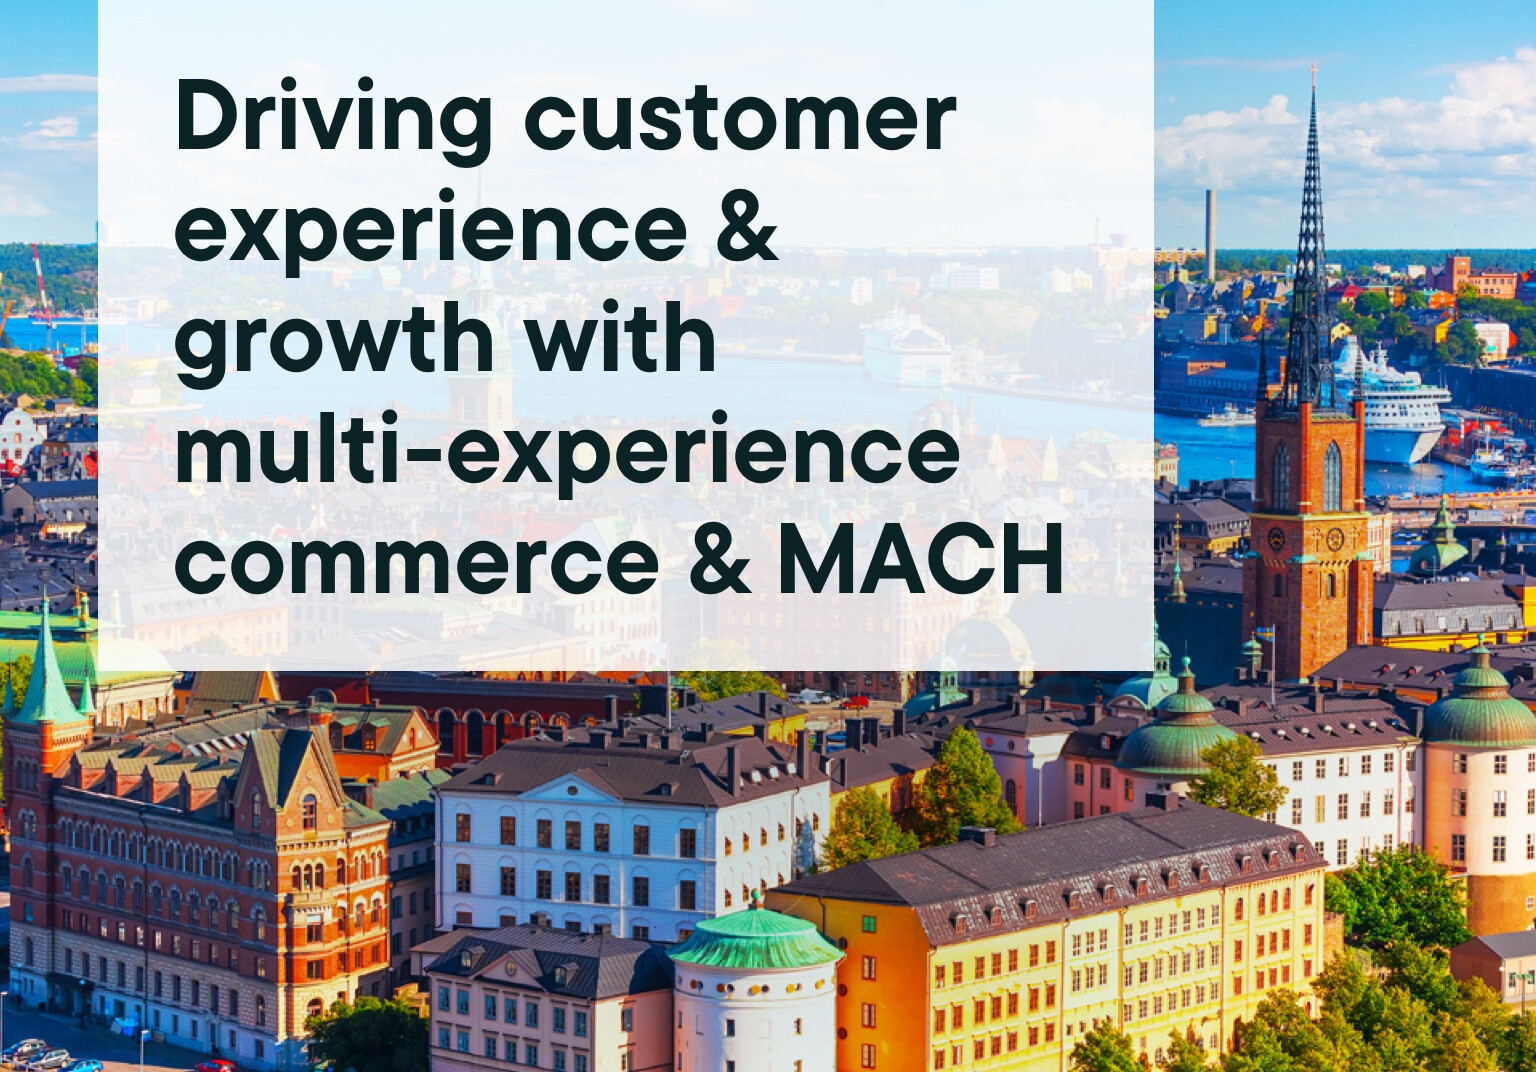 Driving customer experience & growth with multi-experience commerce & MACH